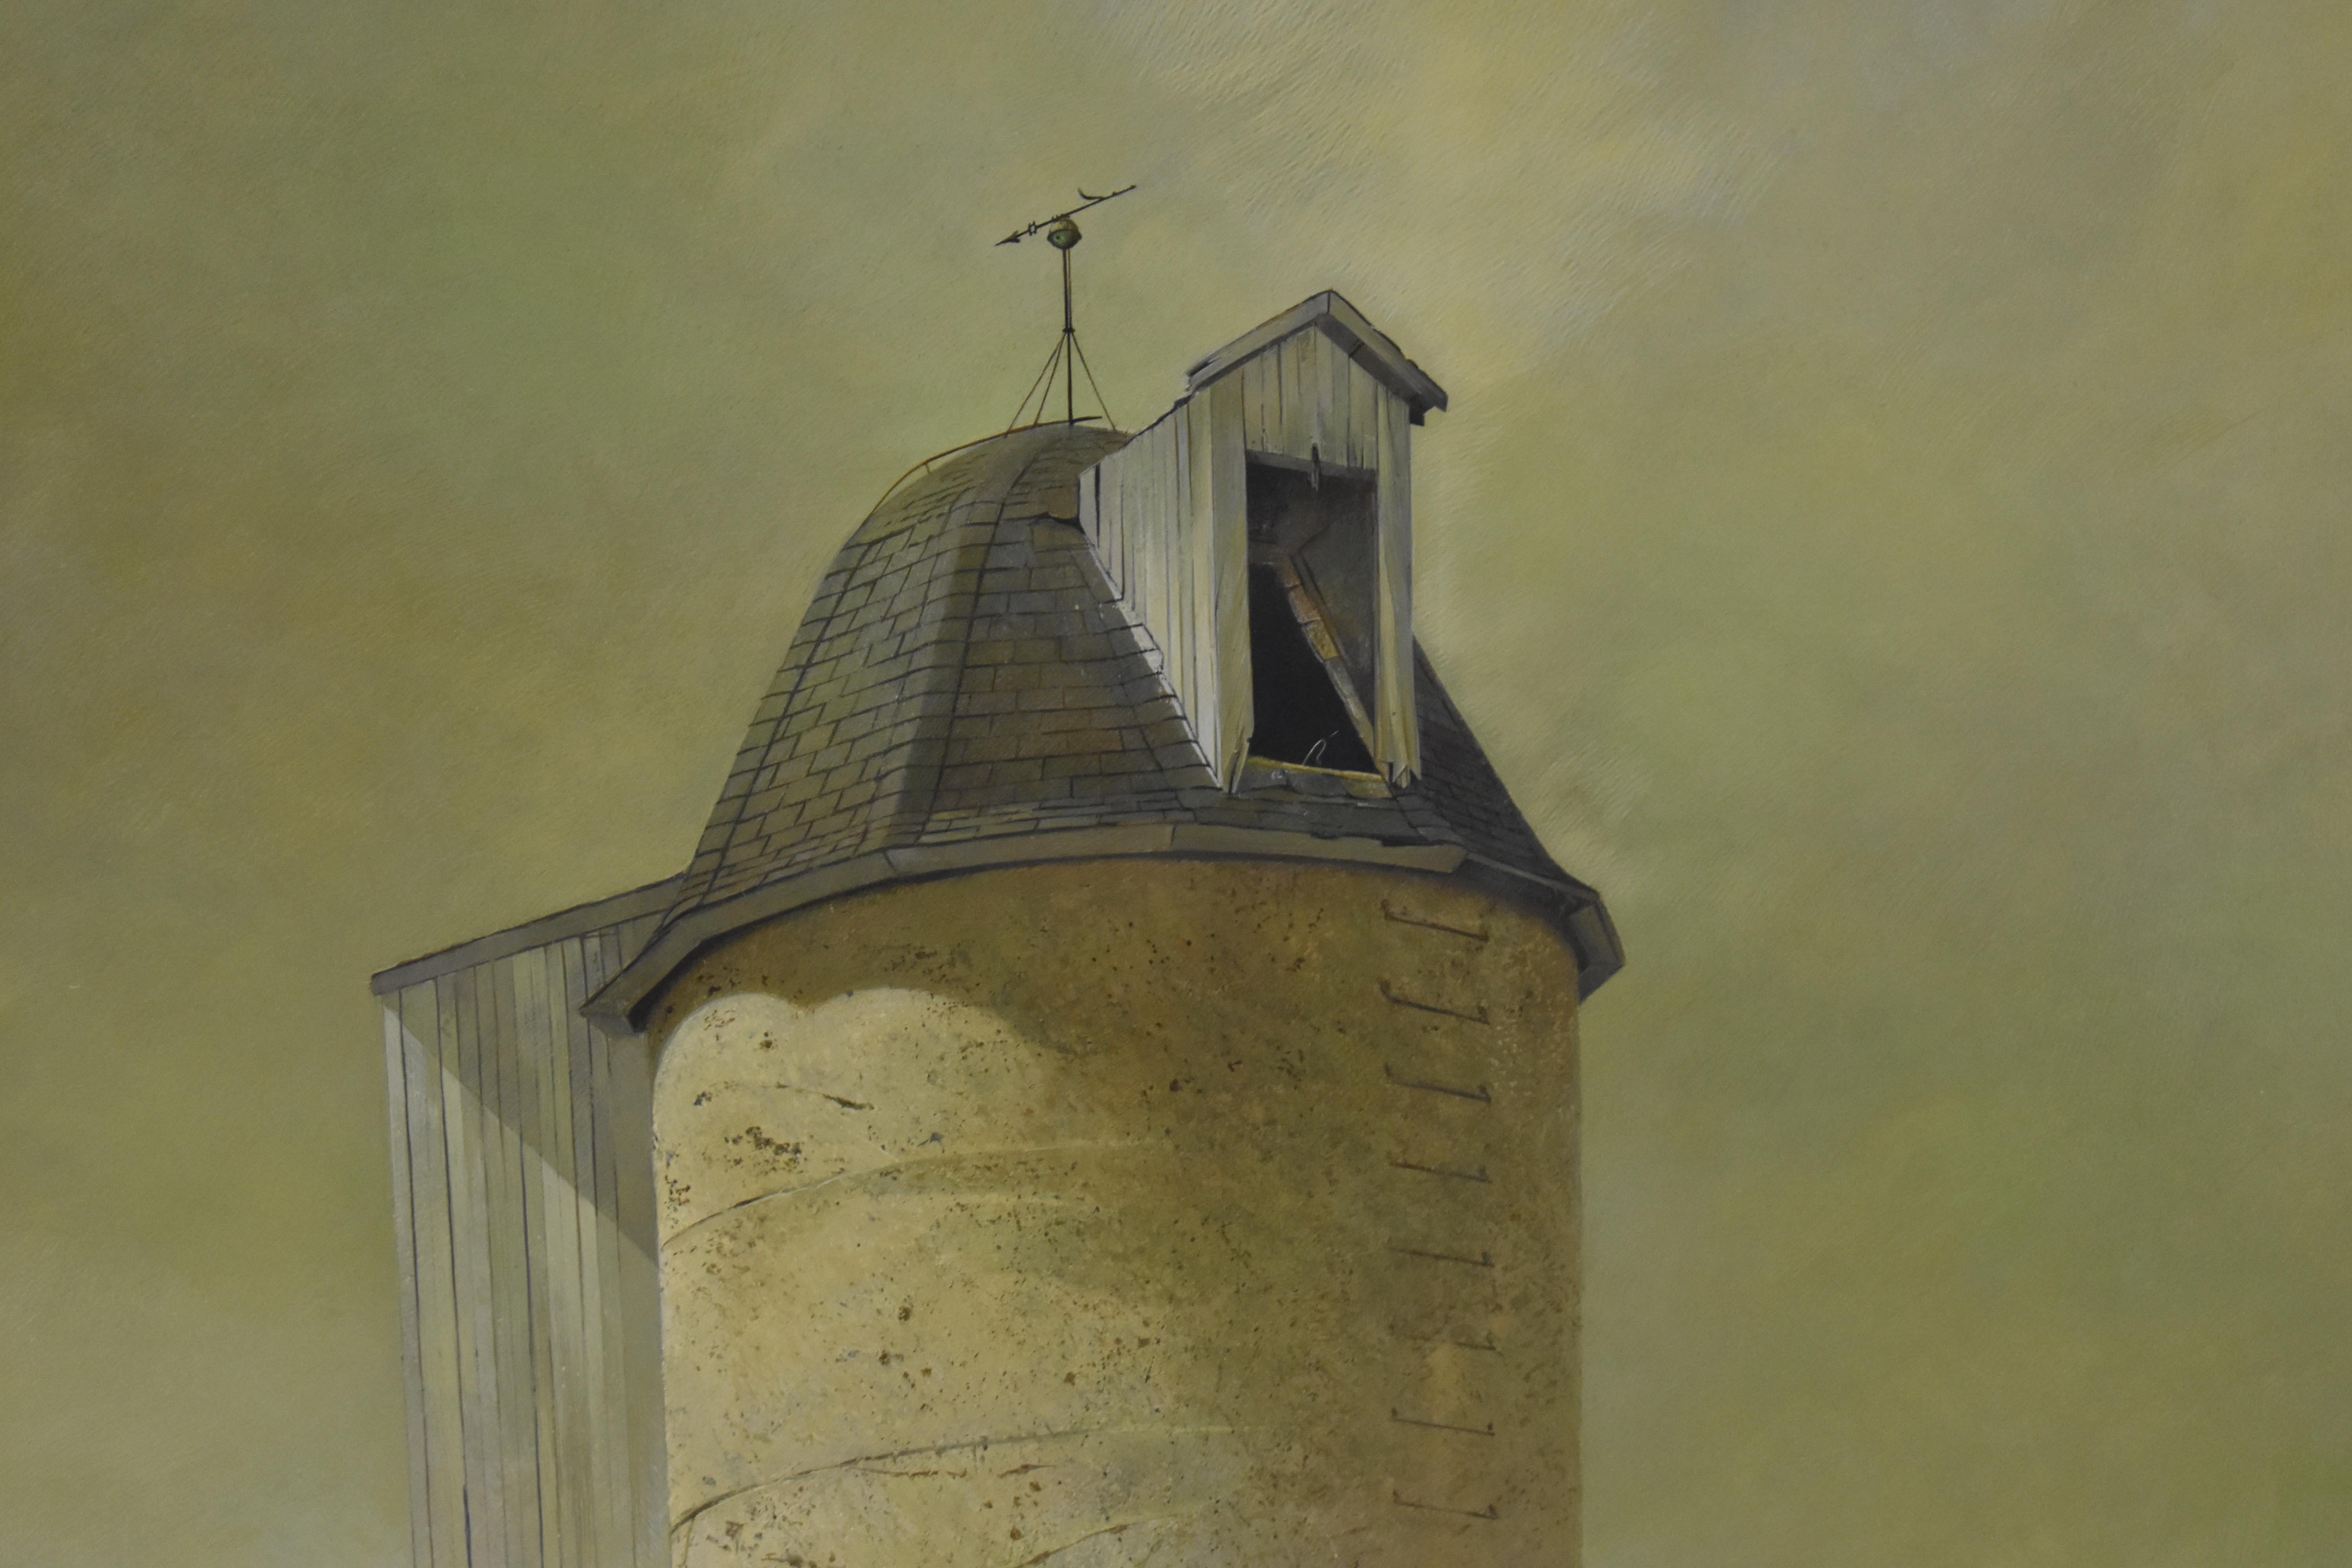 Oversized original oil on canvas of a silo with weathervane. Signed upper left, Richard Treaster. Framed in a distressed lightly stained wood frame with inner linen liner. Very nice condition with wear consistent with age and use. Image size